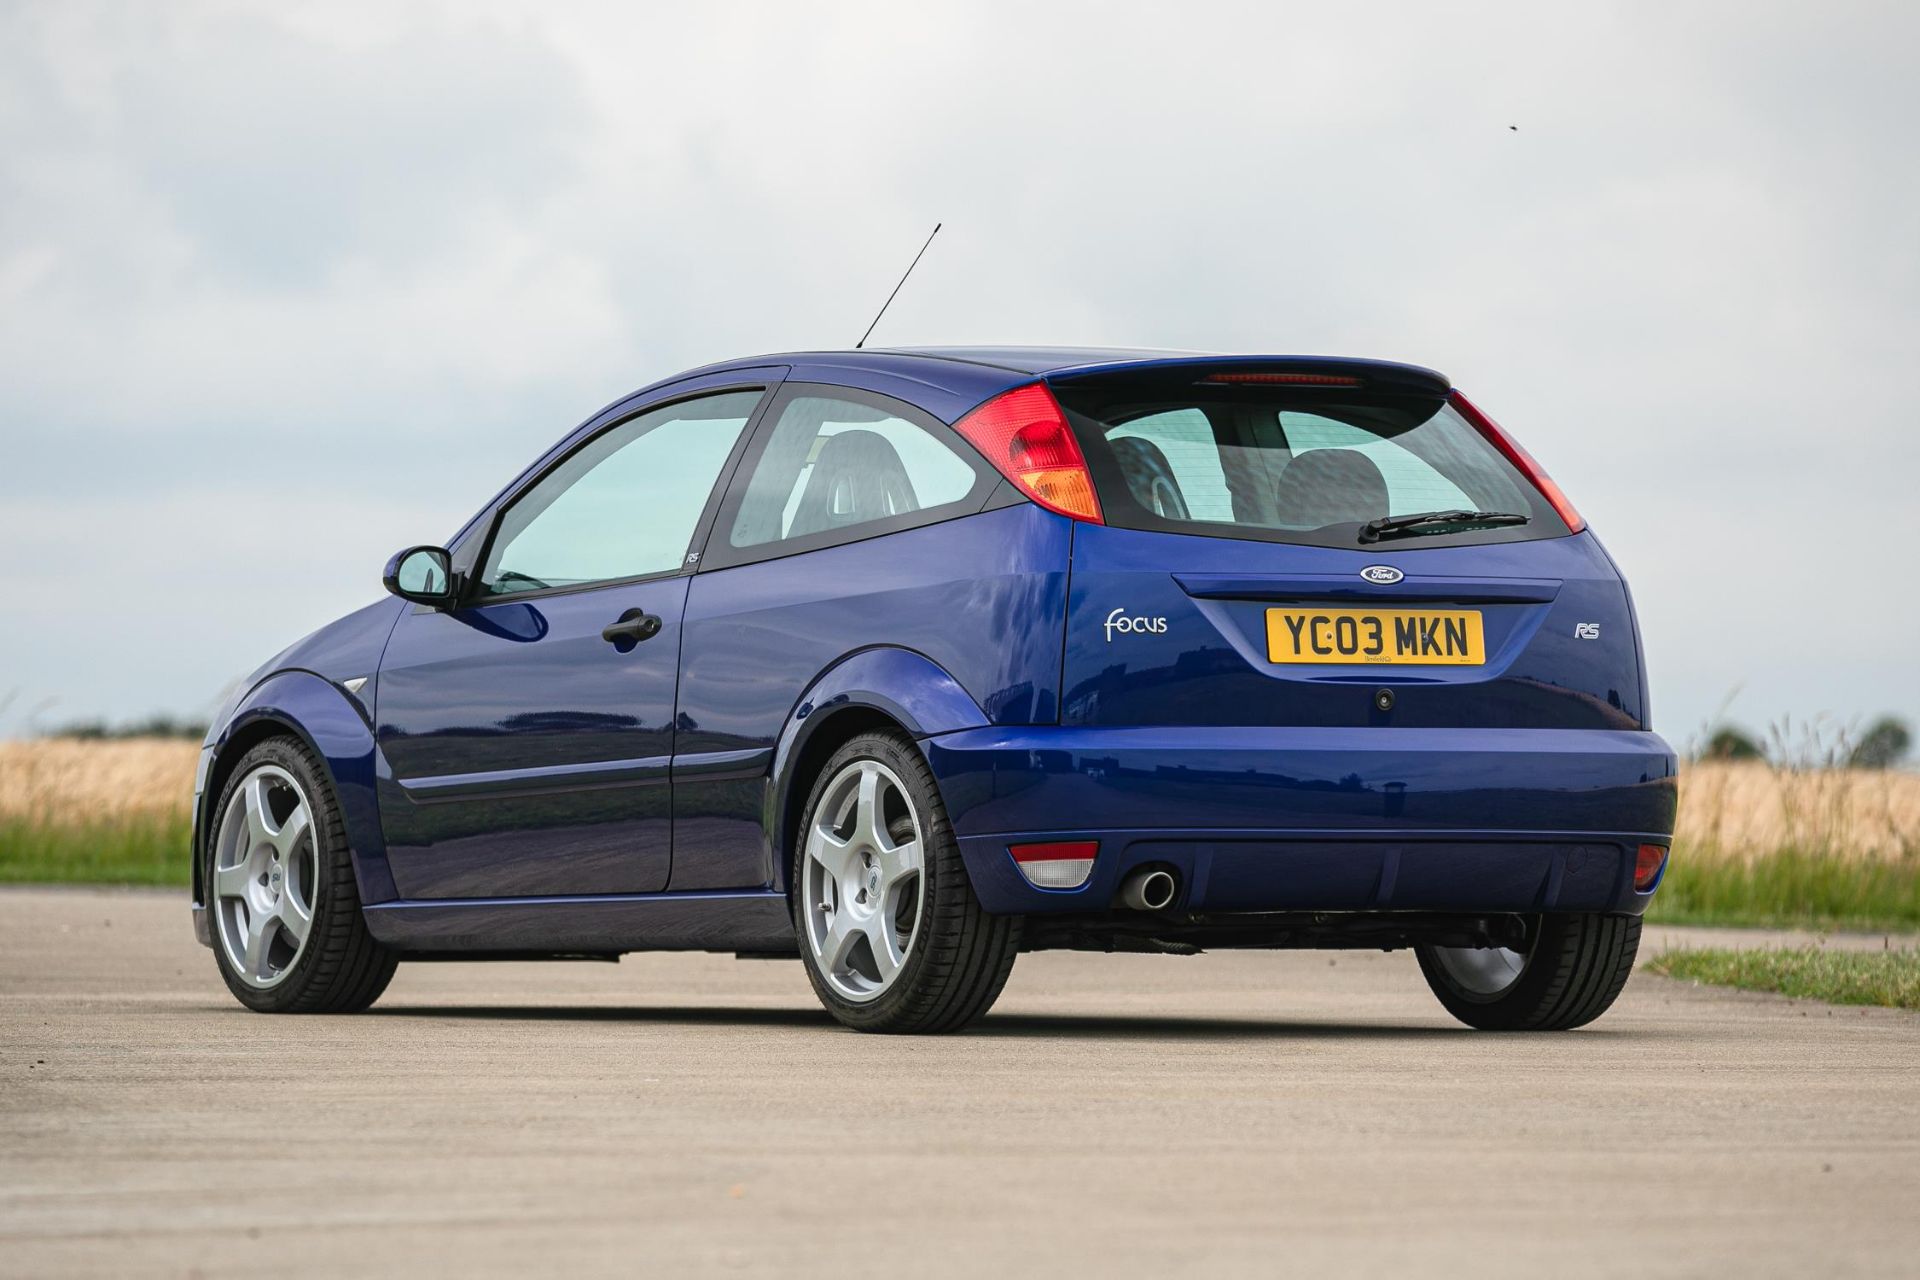 2003 Ford Focus RS Mk1 - Image 5 of 10